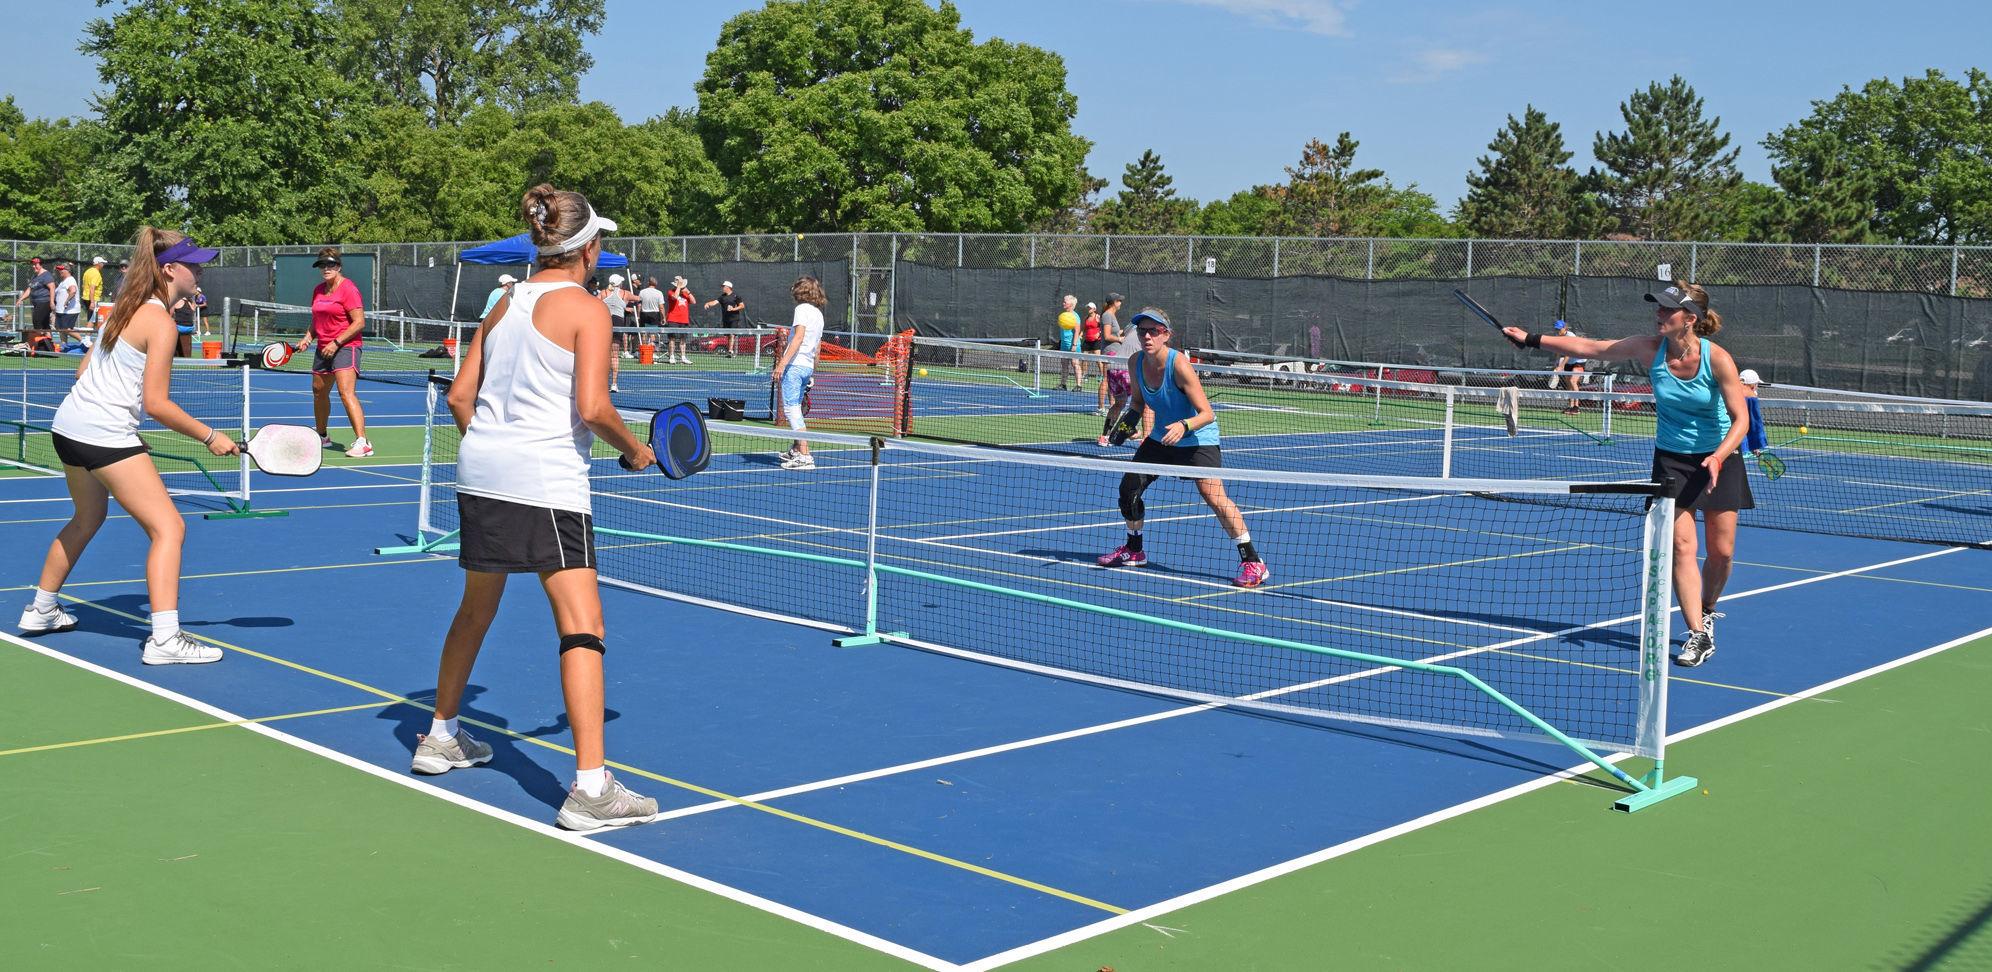 Results out for 2017 Fourth of July Pickleball Tournament | Eden ...